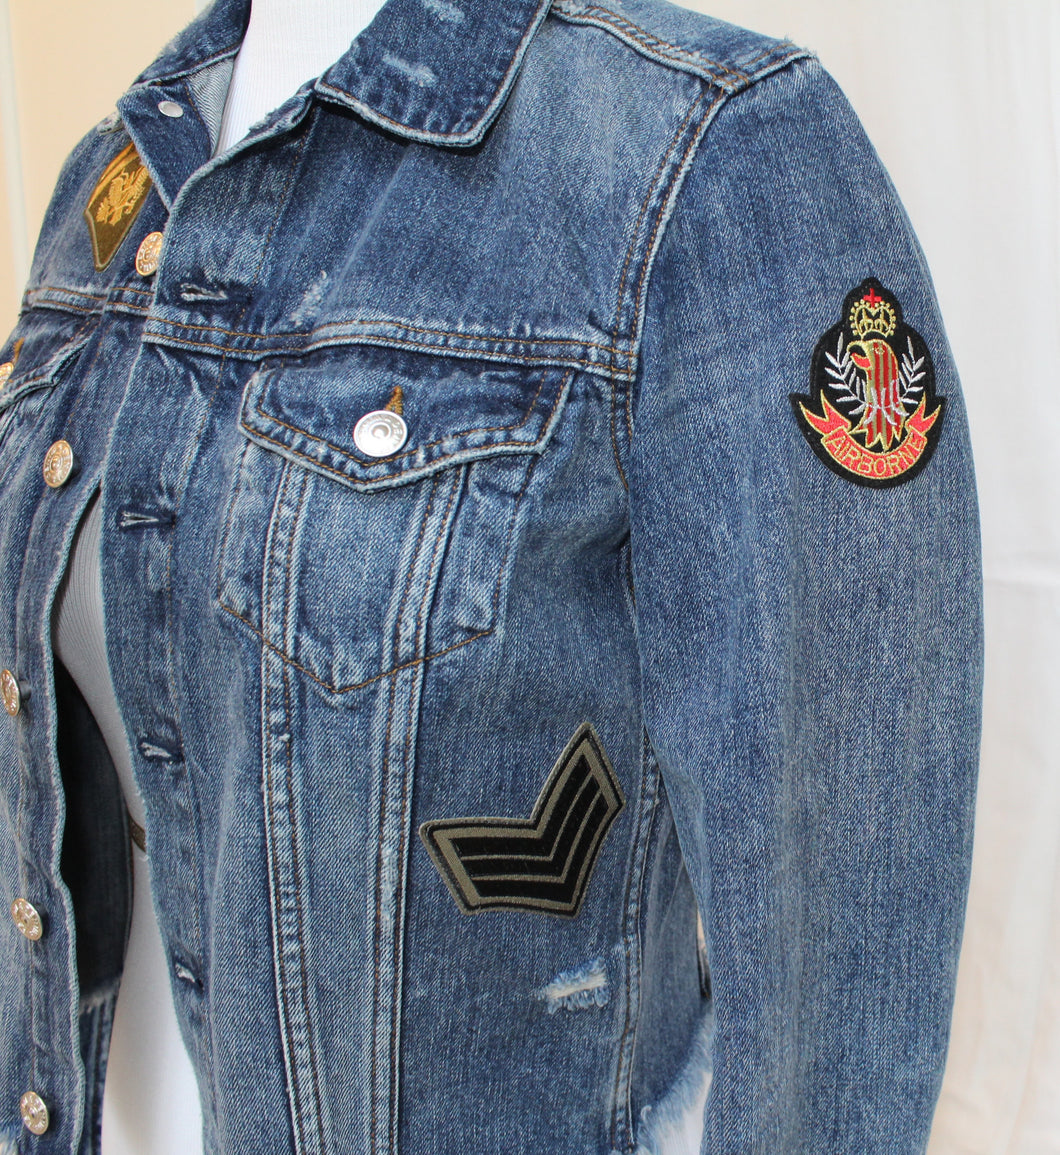 blue jean jacket with patches